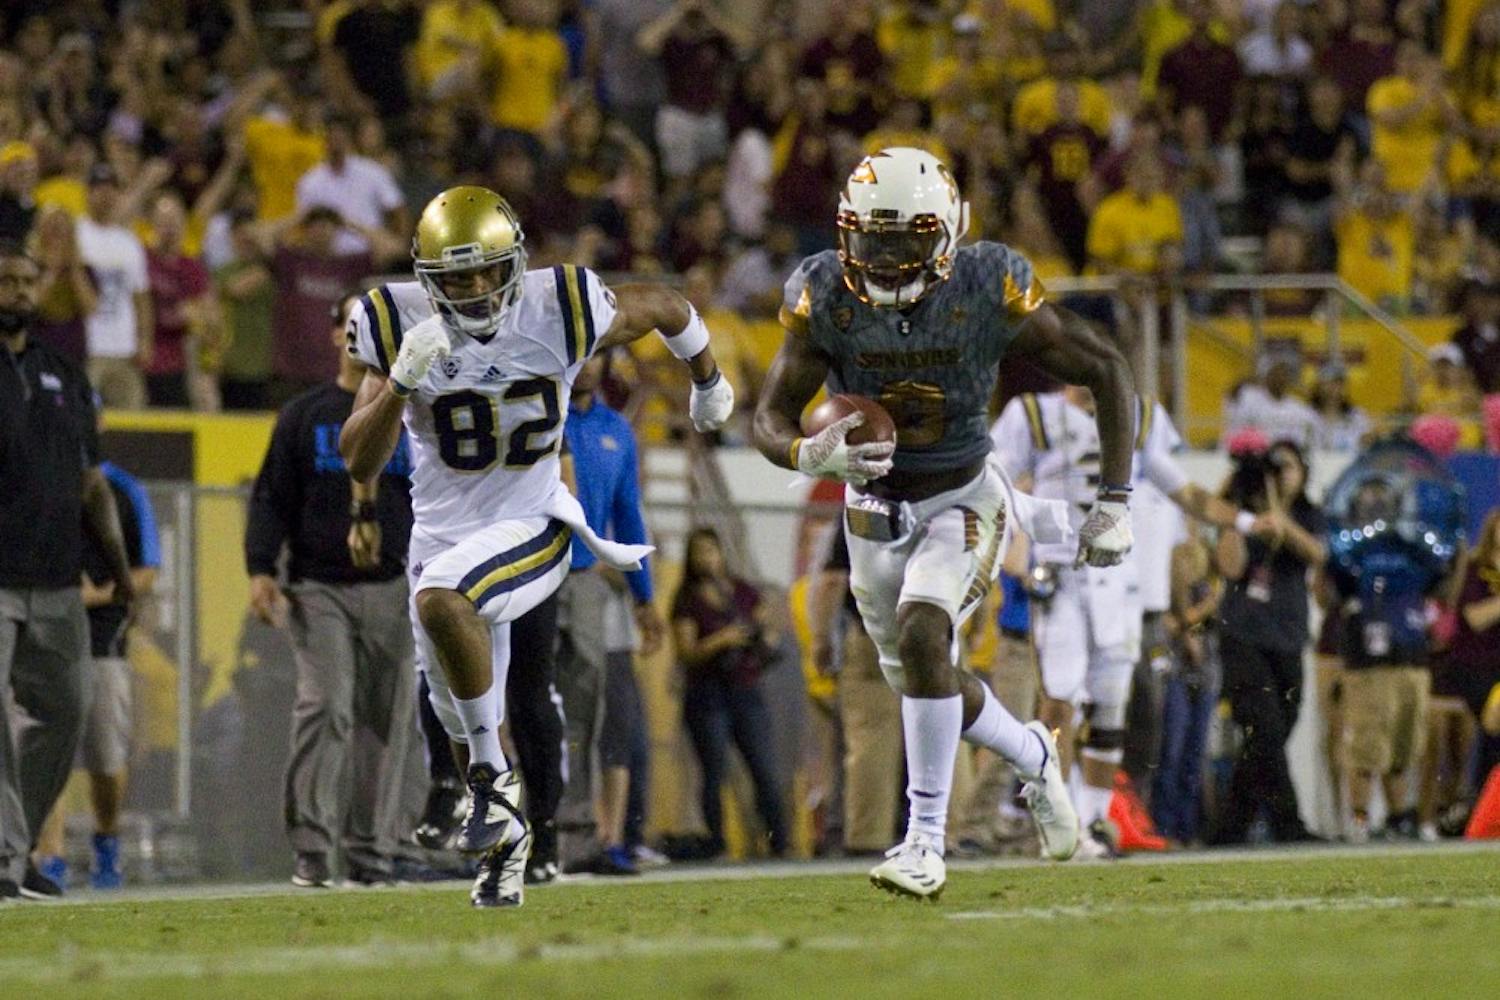 ASU redshirt senior cornerback Gump Hayes (8) intercepts a pass in the second half of the 23-20 victory over the UCLA Bruins in Sun Devil Stadium in Tempe, Arizona, on Saturday, Oct. 8, 2016.